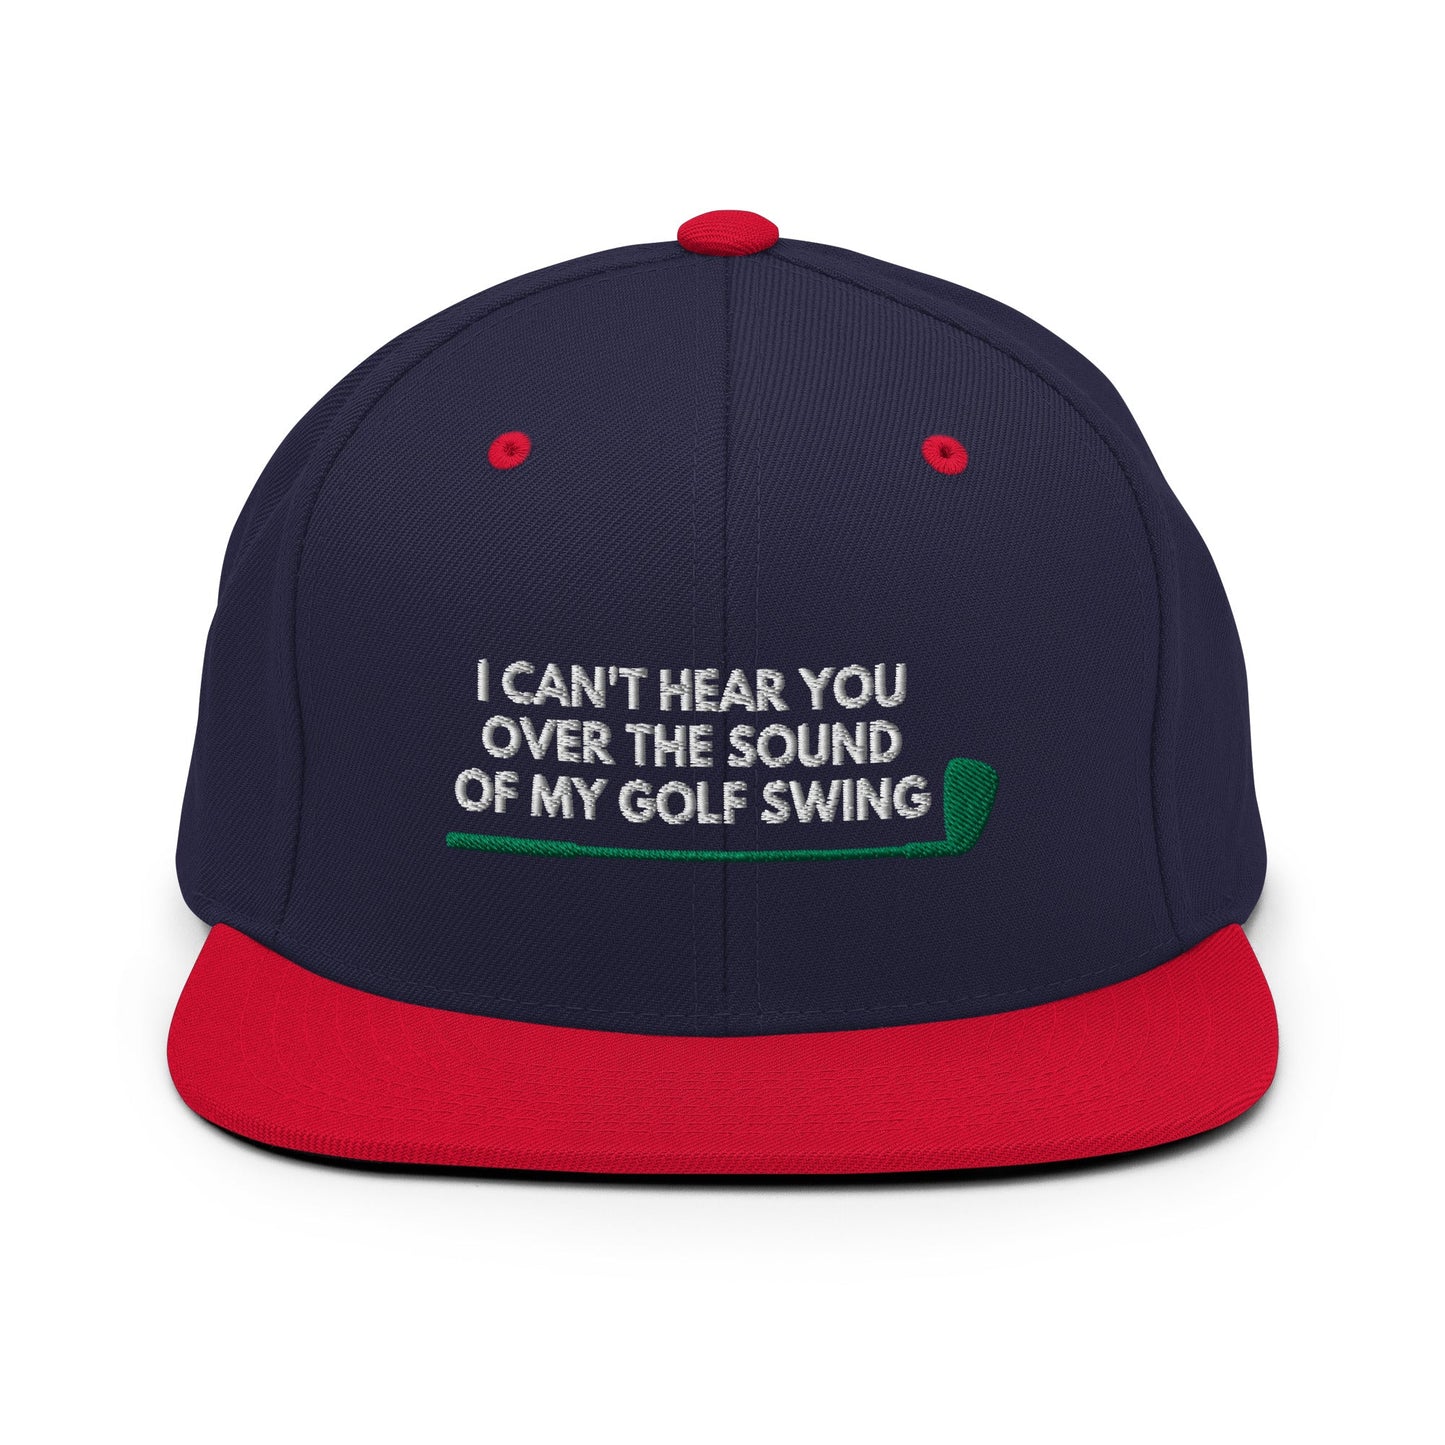 Funny Golfer Gifts  Snapback Hat Navy/ Red I Cant Hear You Over The Sound Of My Golf Swing Hat Snapback Hat